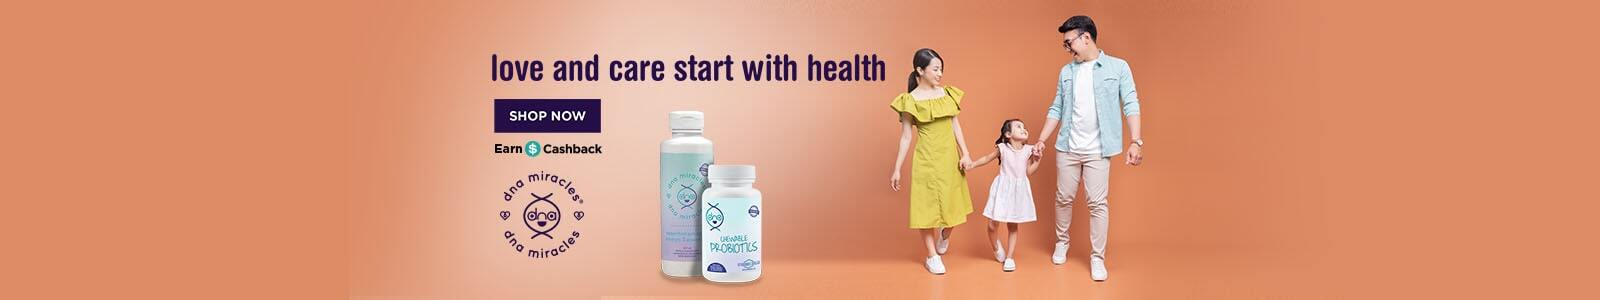 Dna miracles. Love and Care Start with Health. SHOP NOW